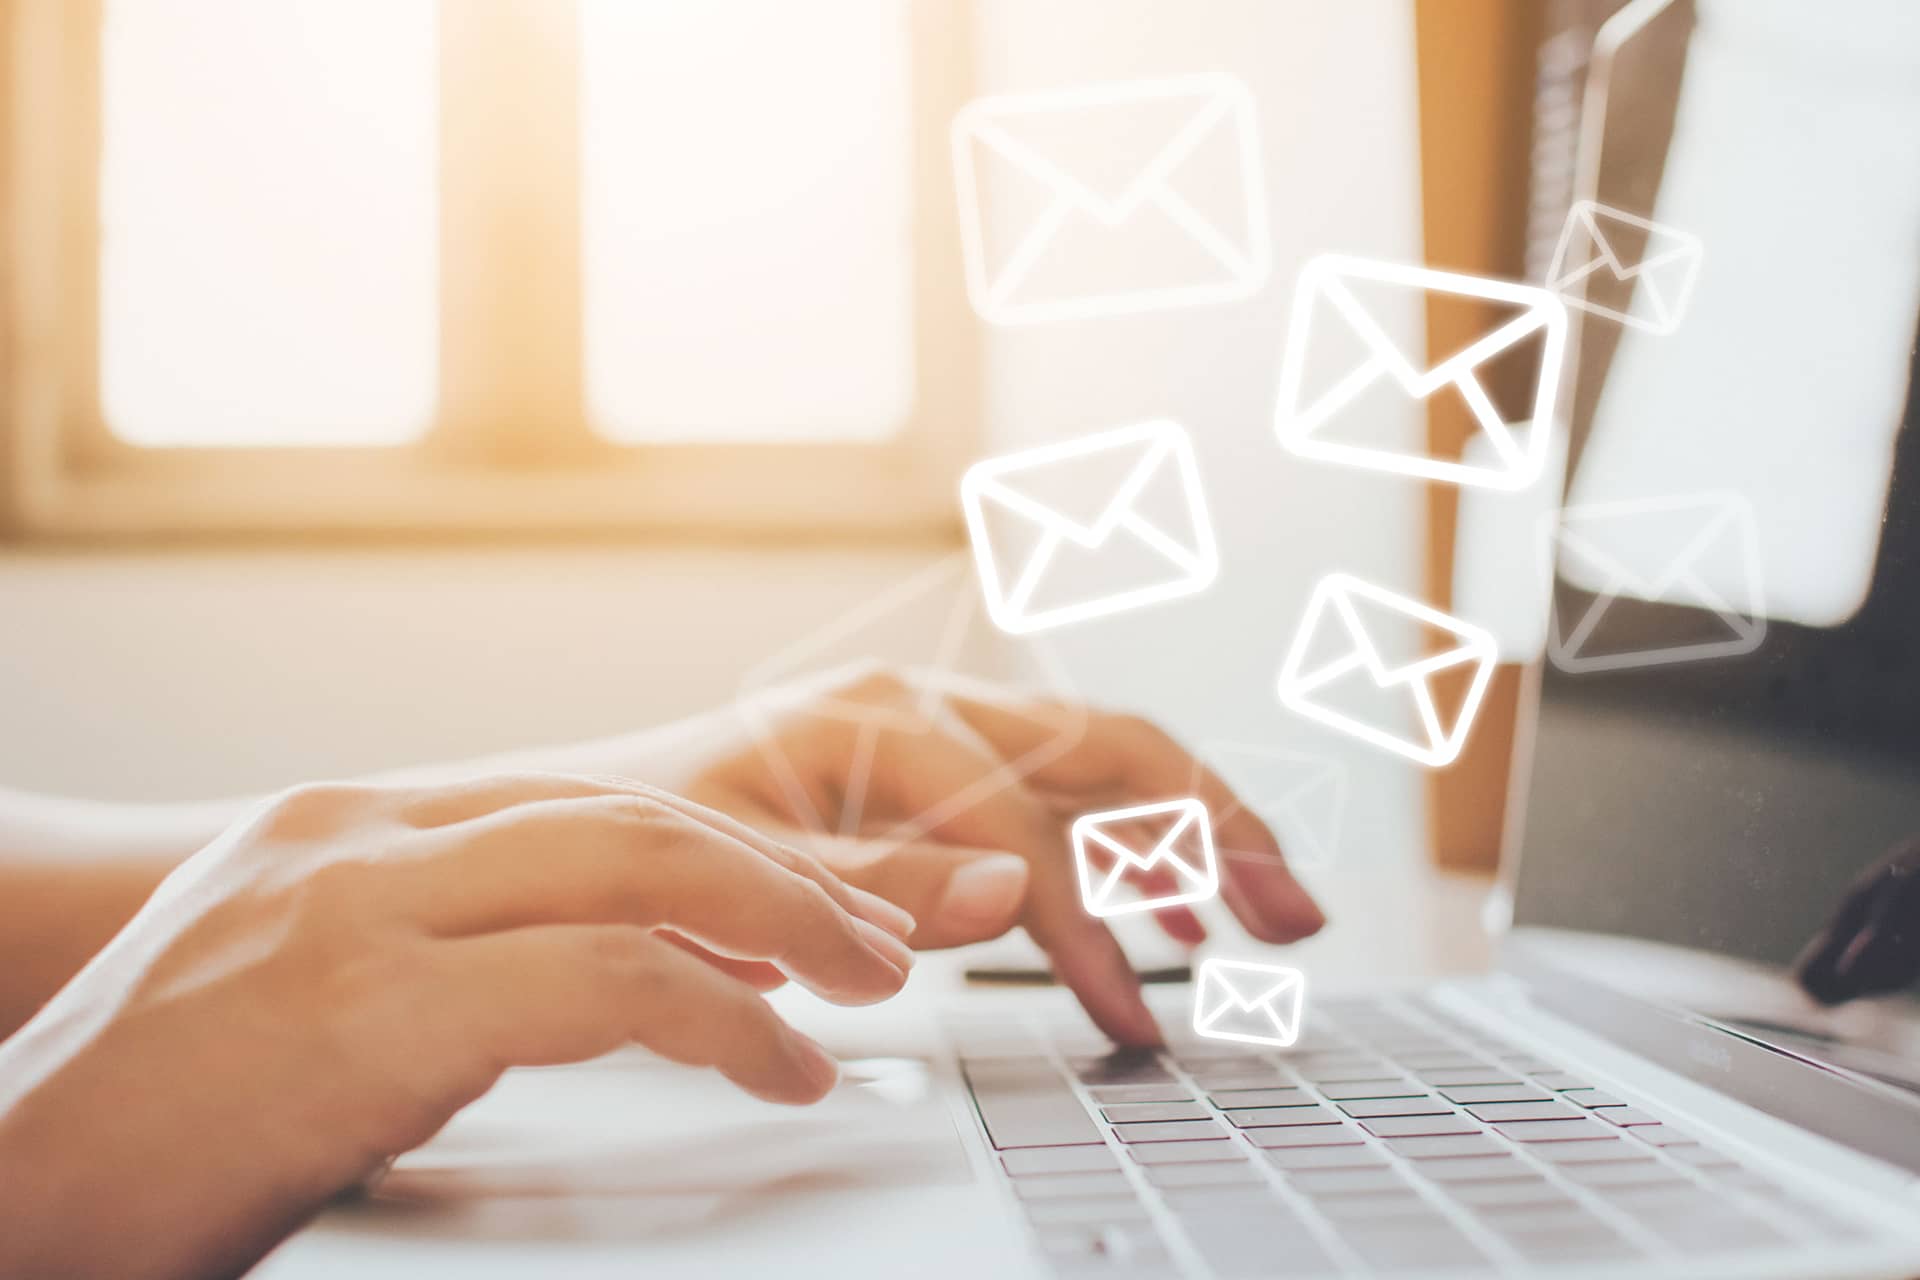 Email marketing helps your online marketing